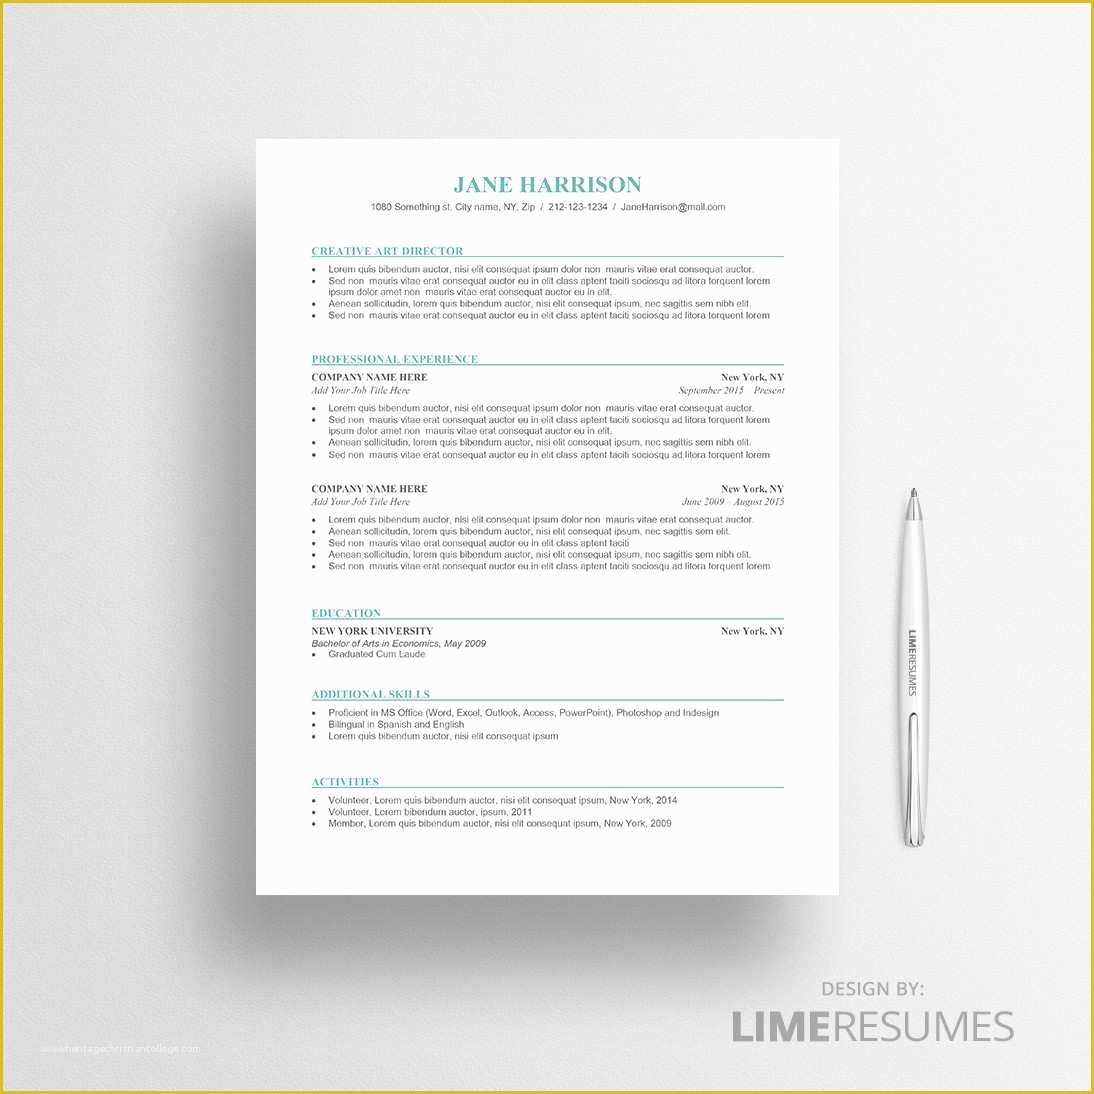 Ats Friendly Resume Template Free Of ats Friendly Resume Regular ats Resume Template ats